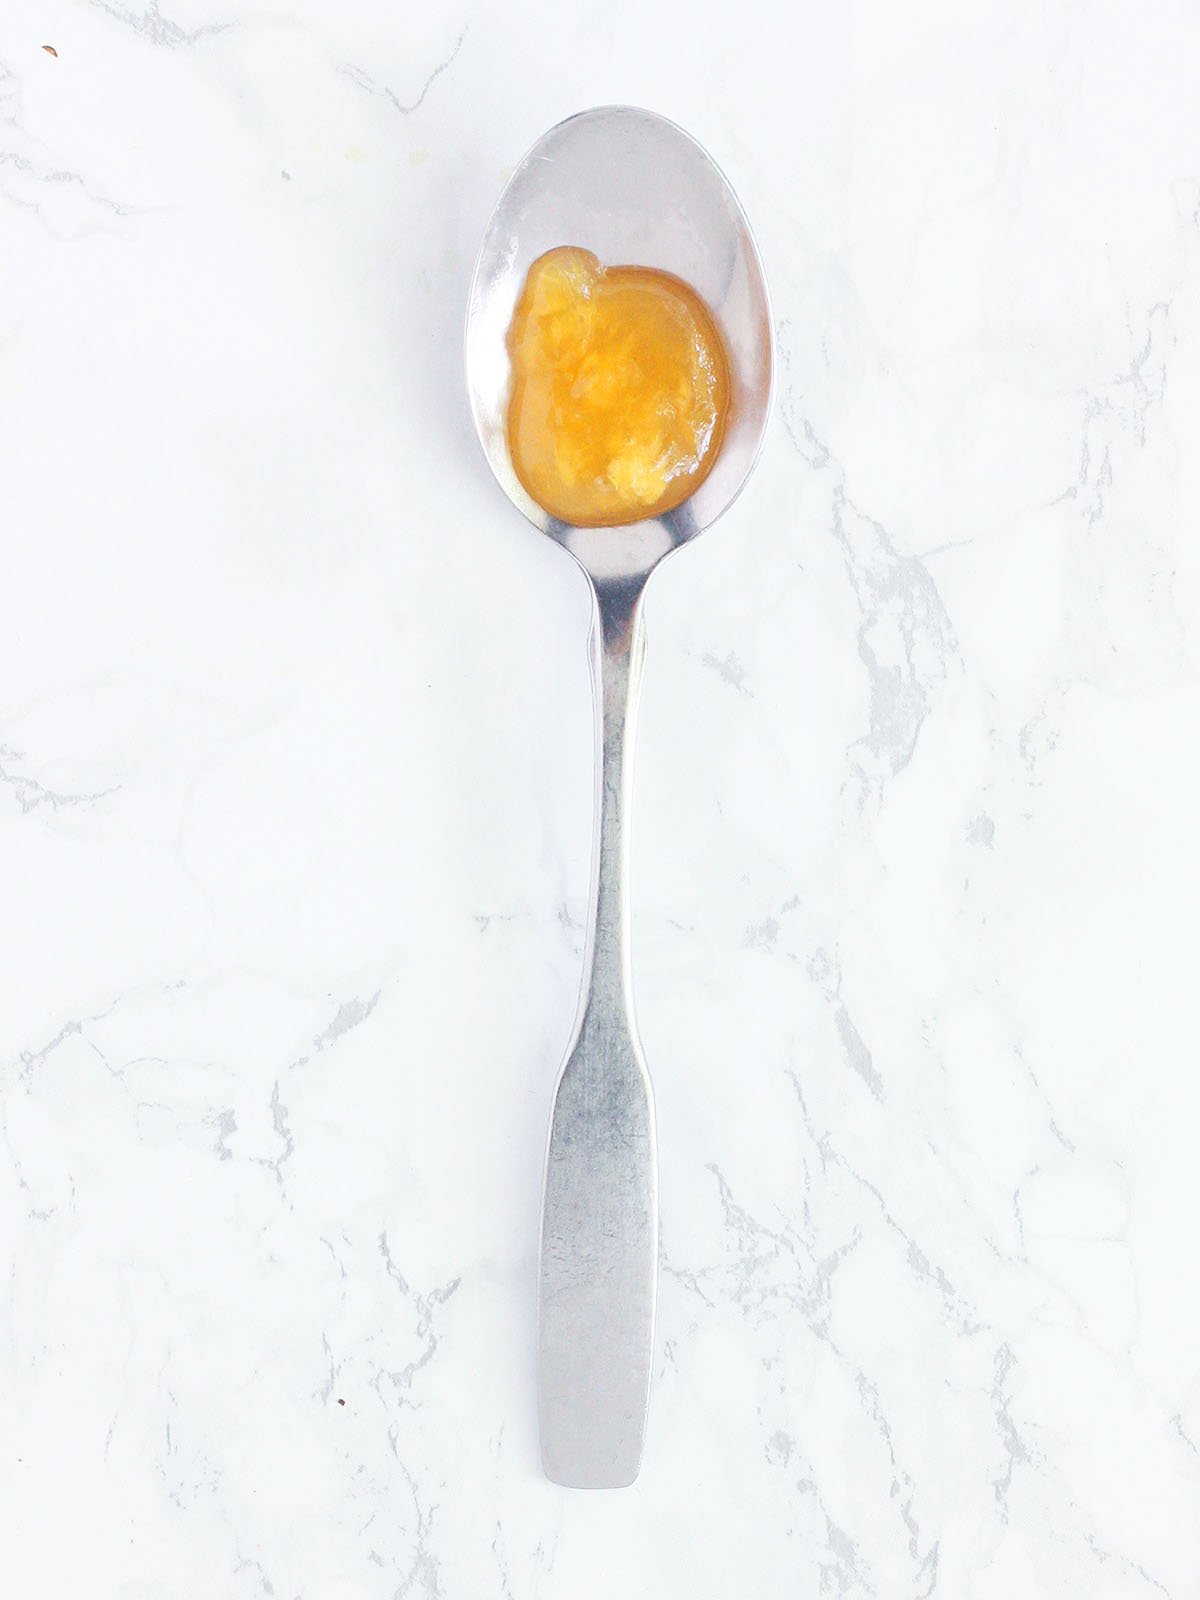 Drop of peach preserves on a cold spoon.